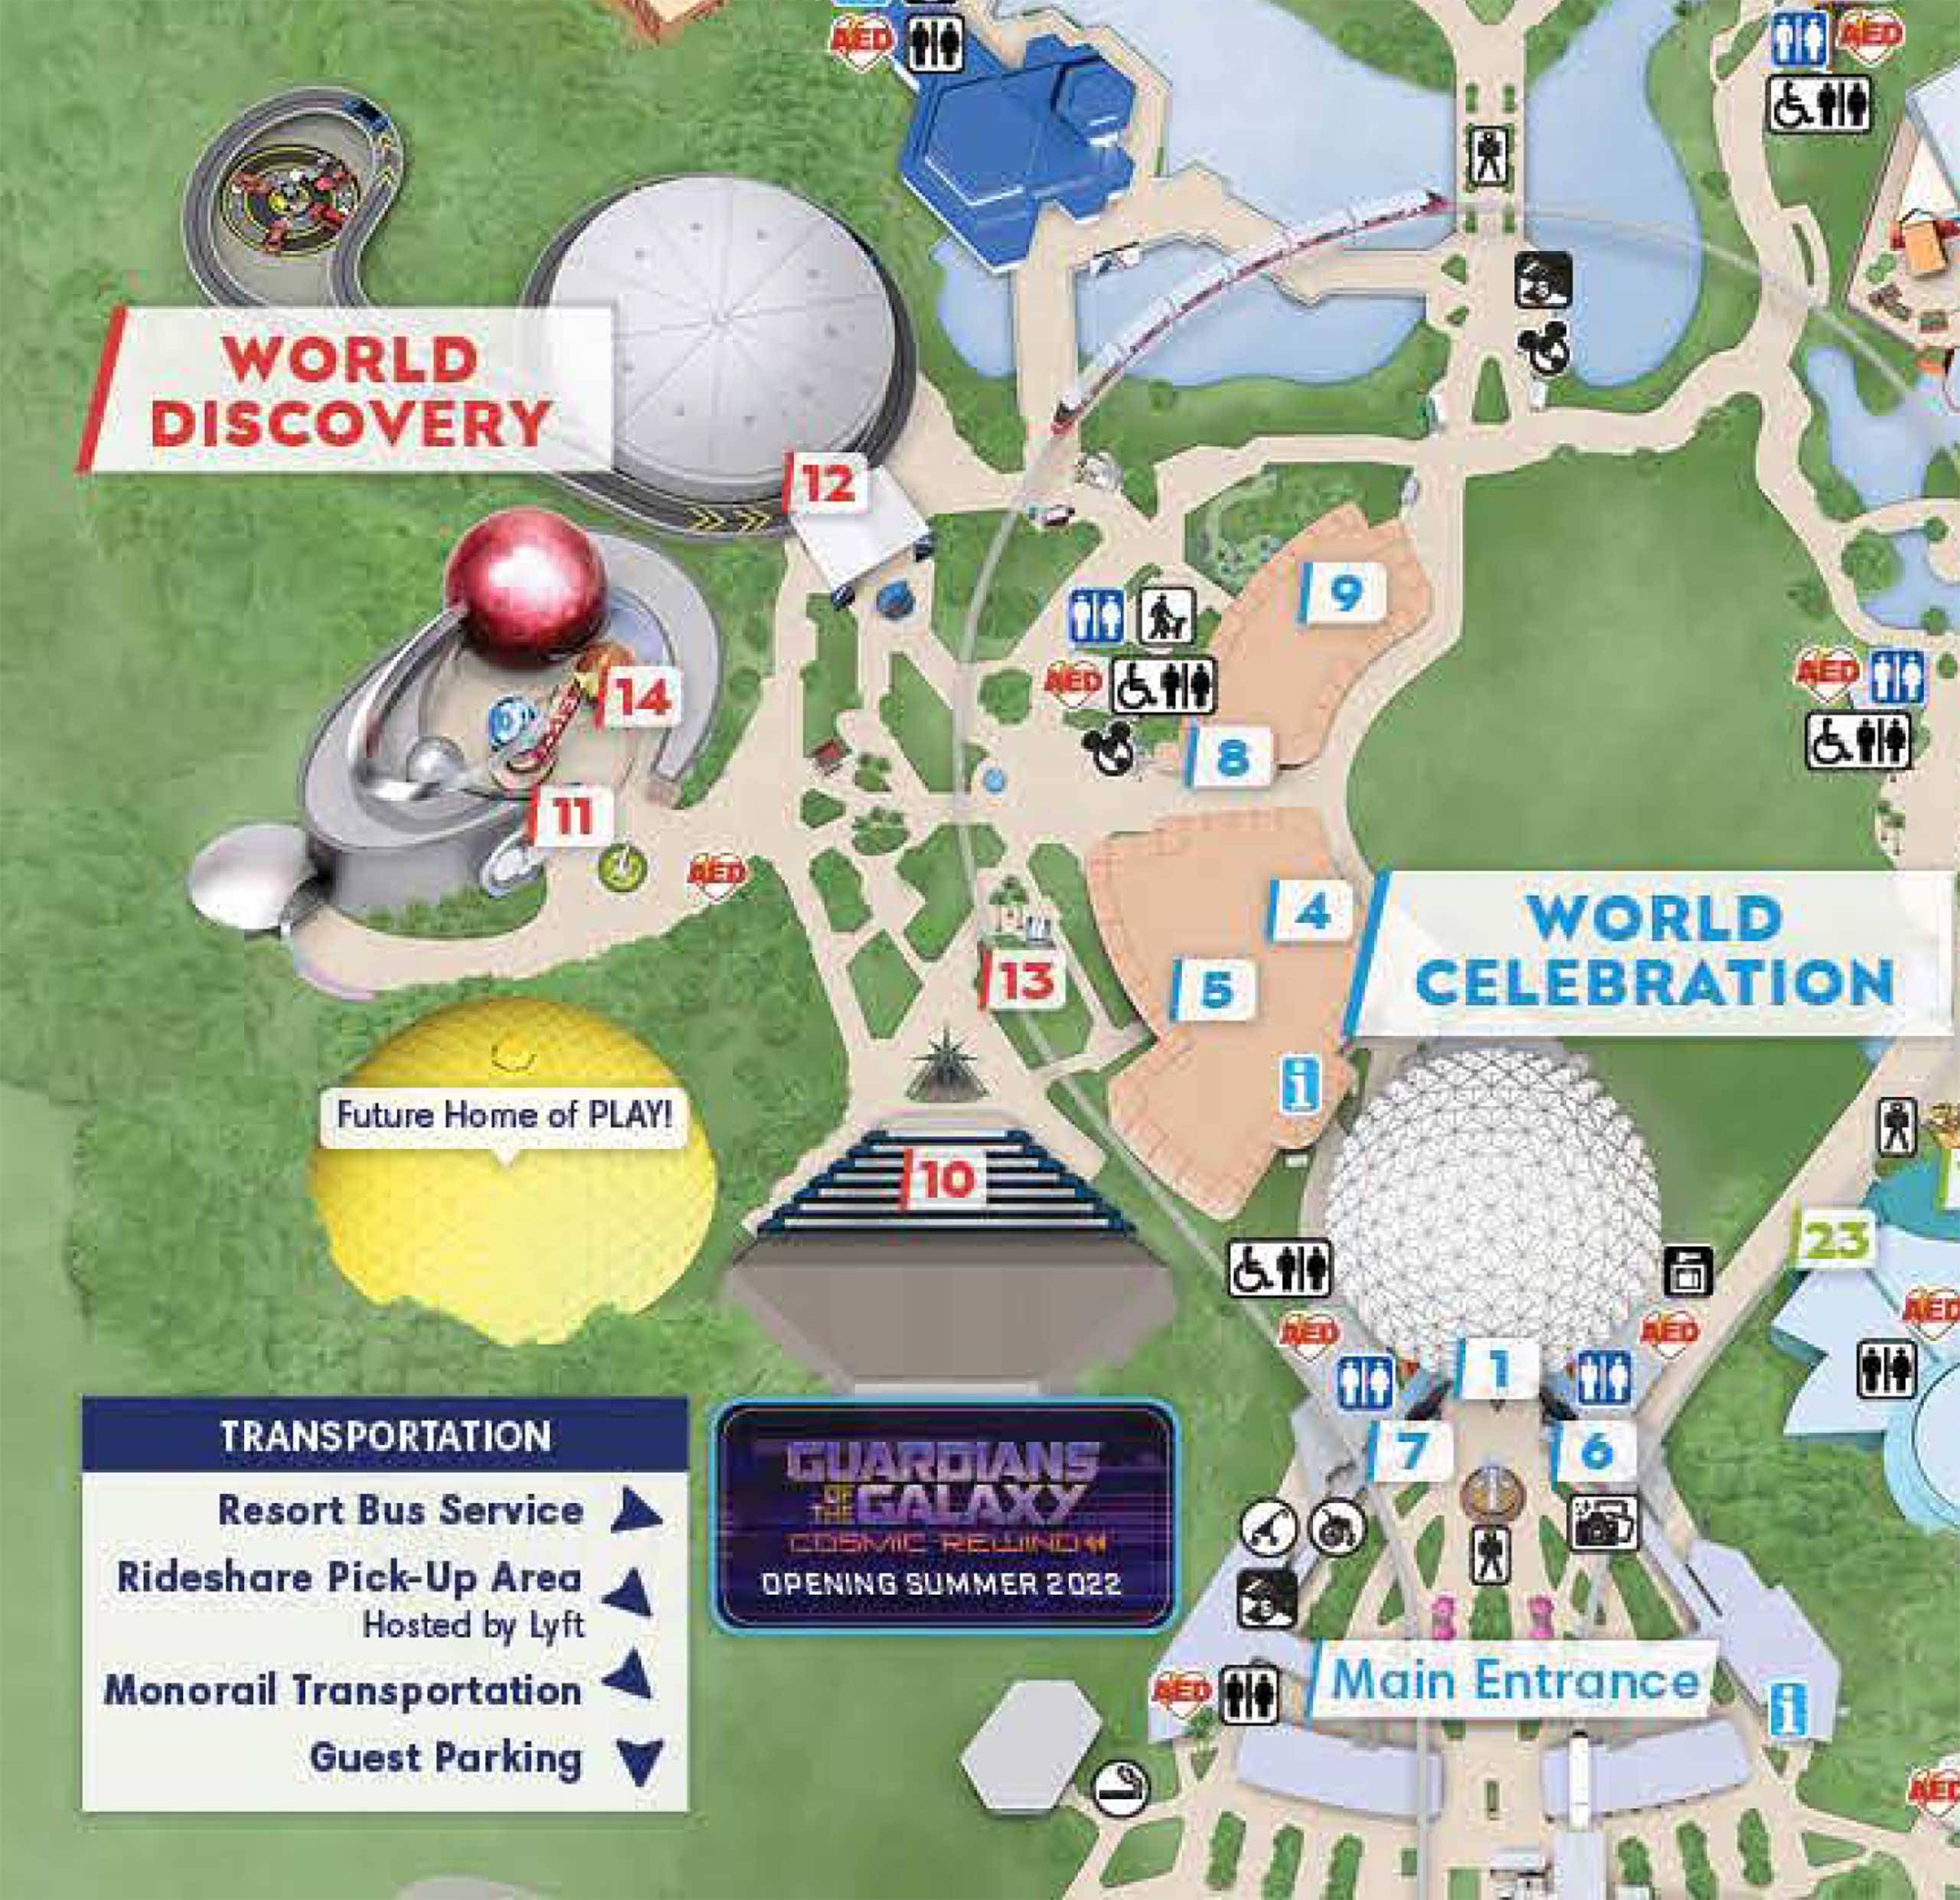 EPCOT guide map - March 2022 - Closeup of walkway changes on map